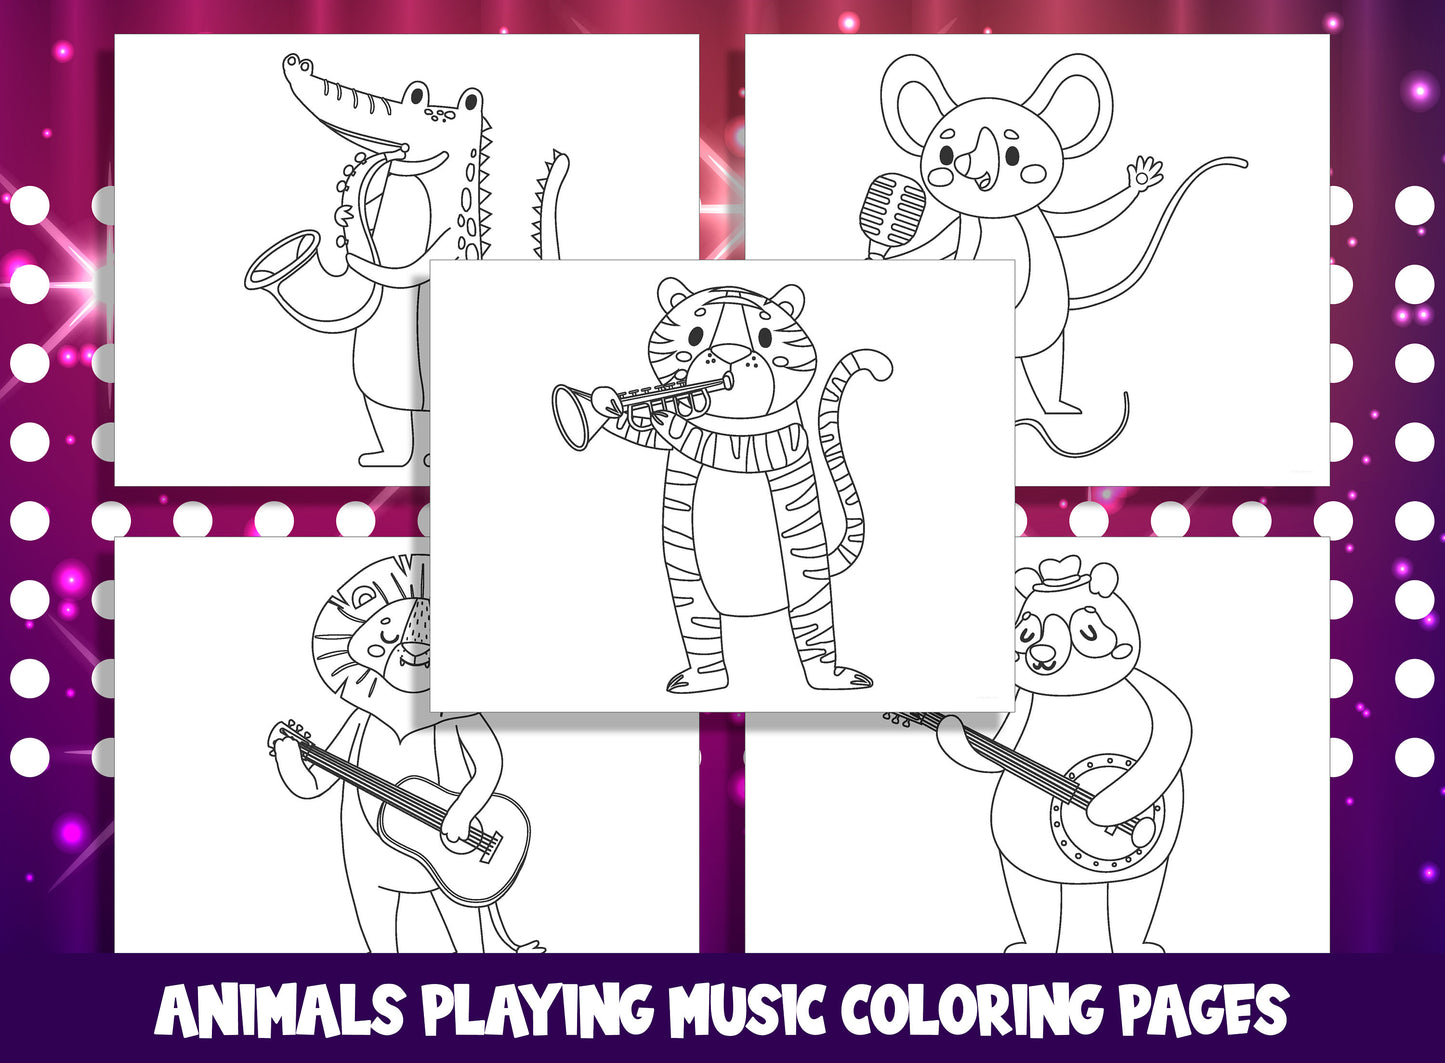 Animals Playing Music Coloring Pages: 20 Melodious Designs, PDF File, Instant Download